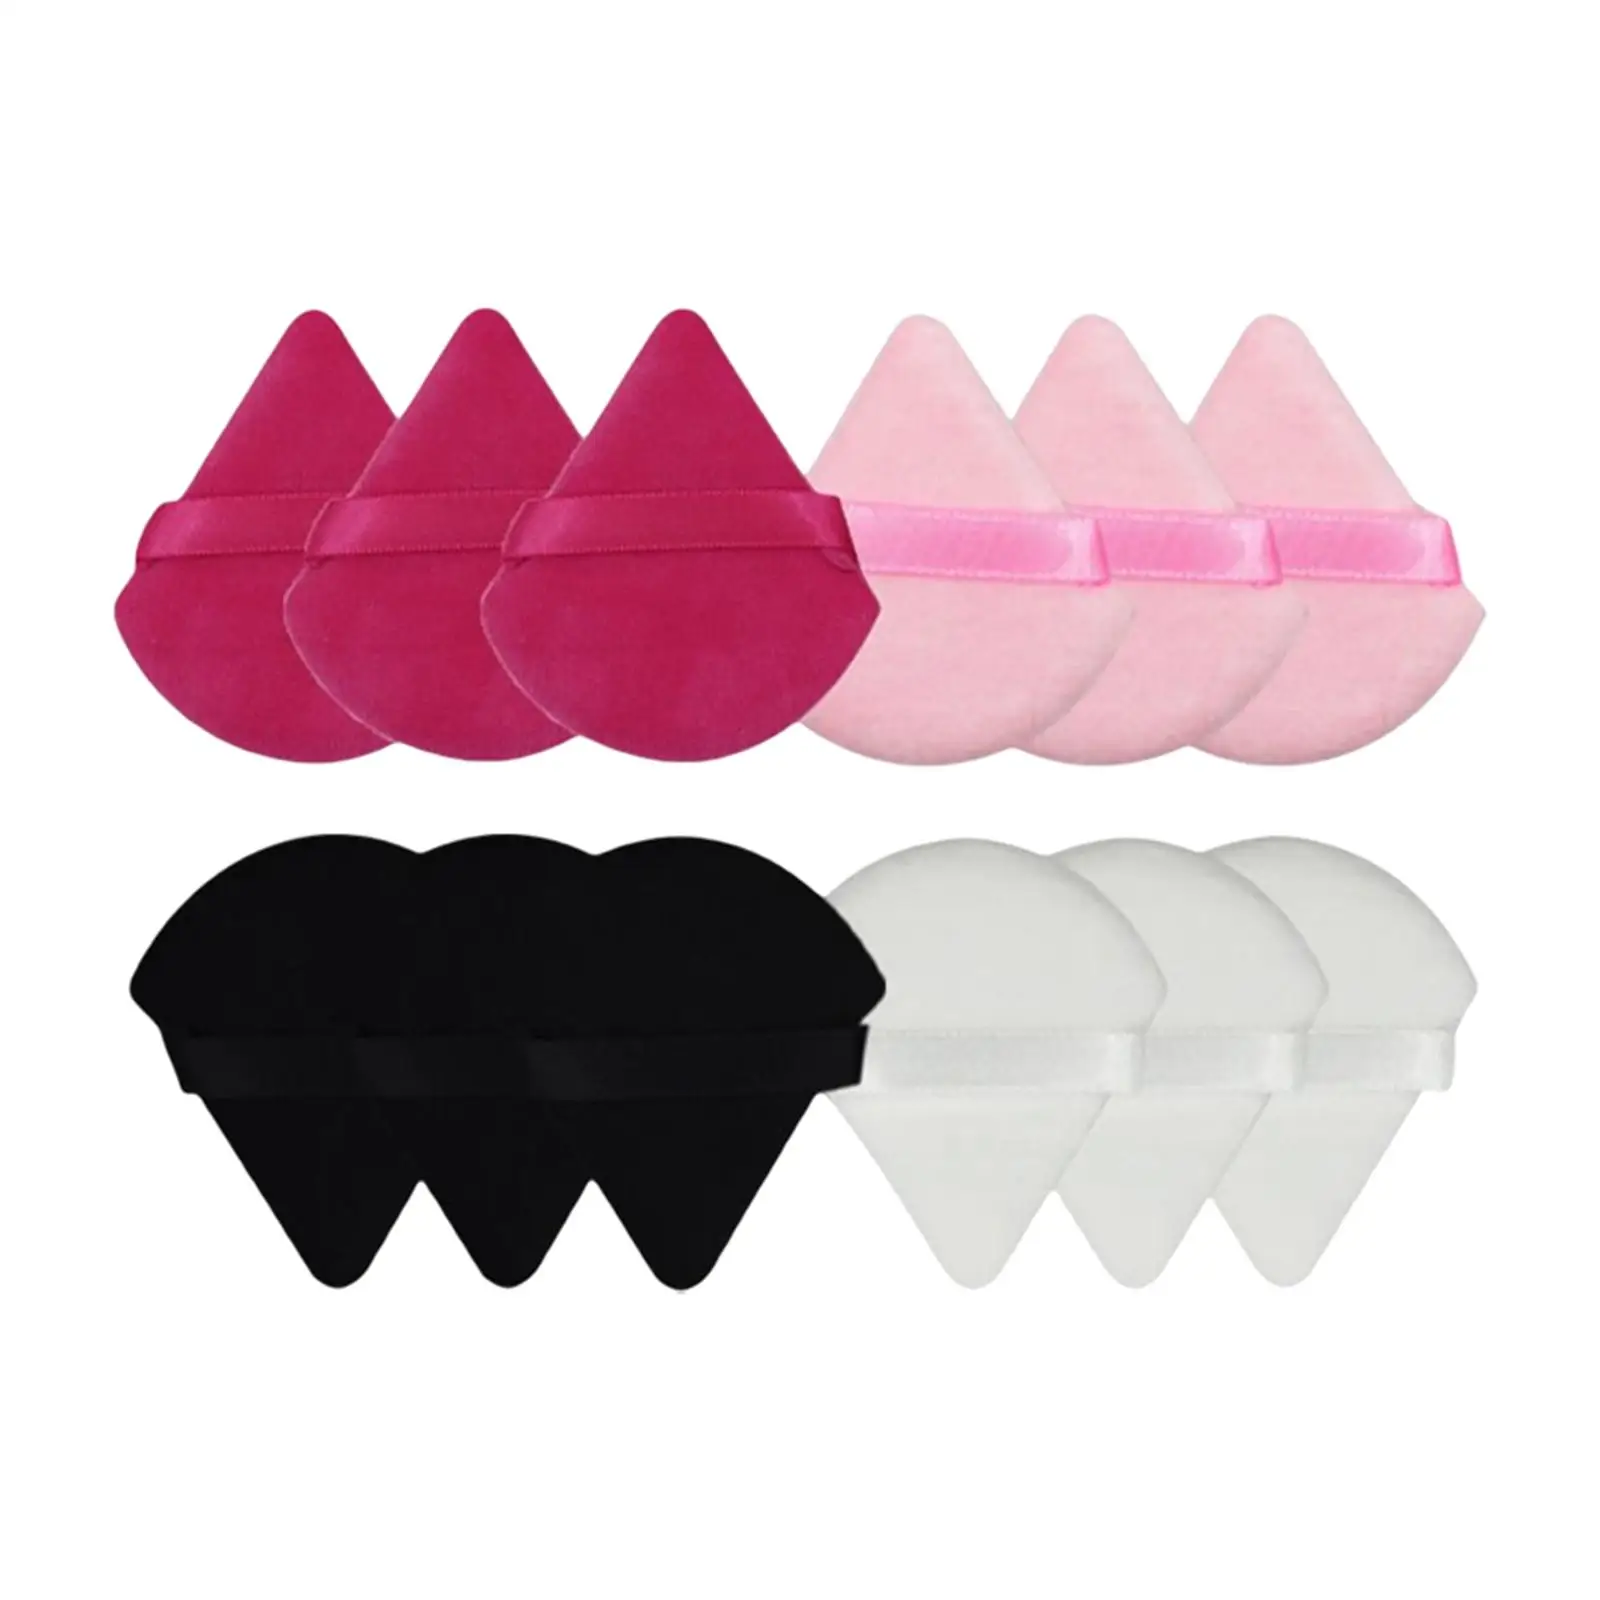 1Set Triangle Powder Beauty Makeup Tool with Strap Washable Wedge Shape Cosmetic Sponge for Loose Powder Blush Foundation